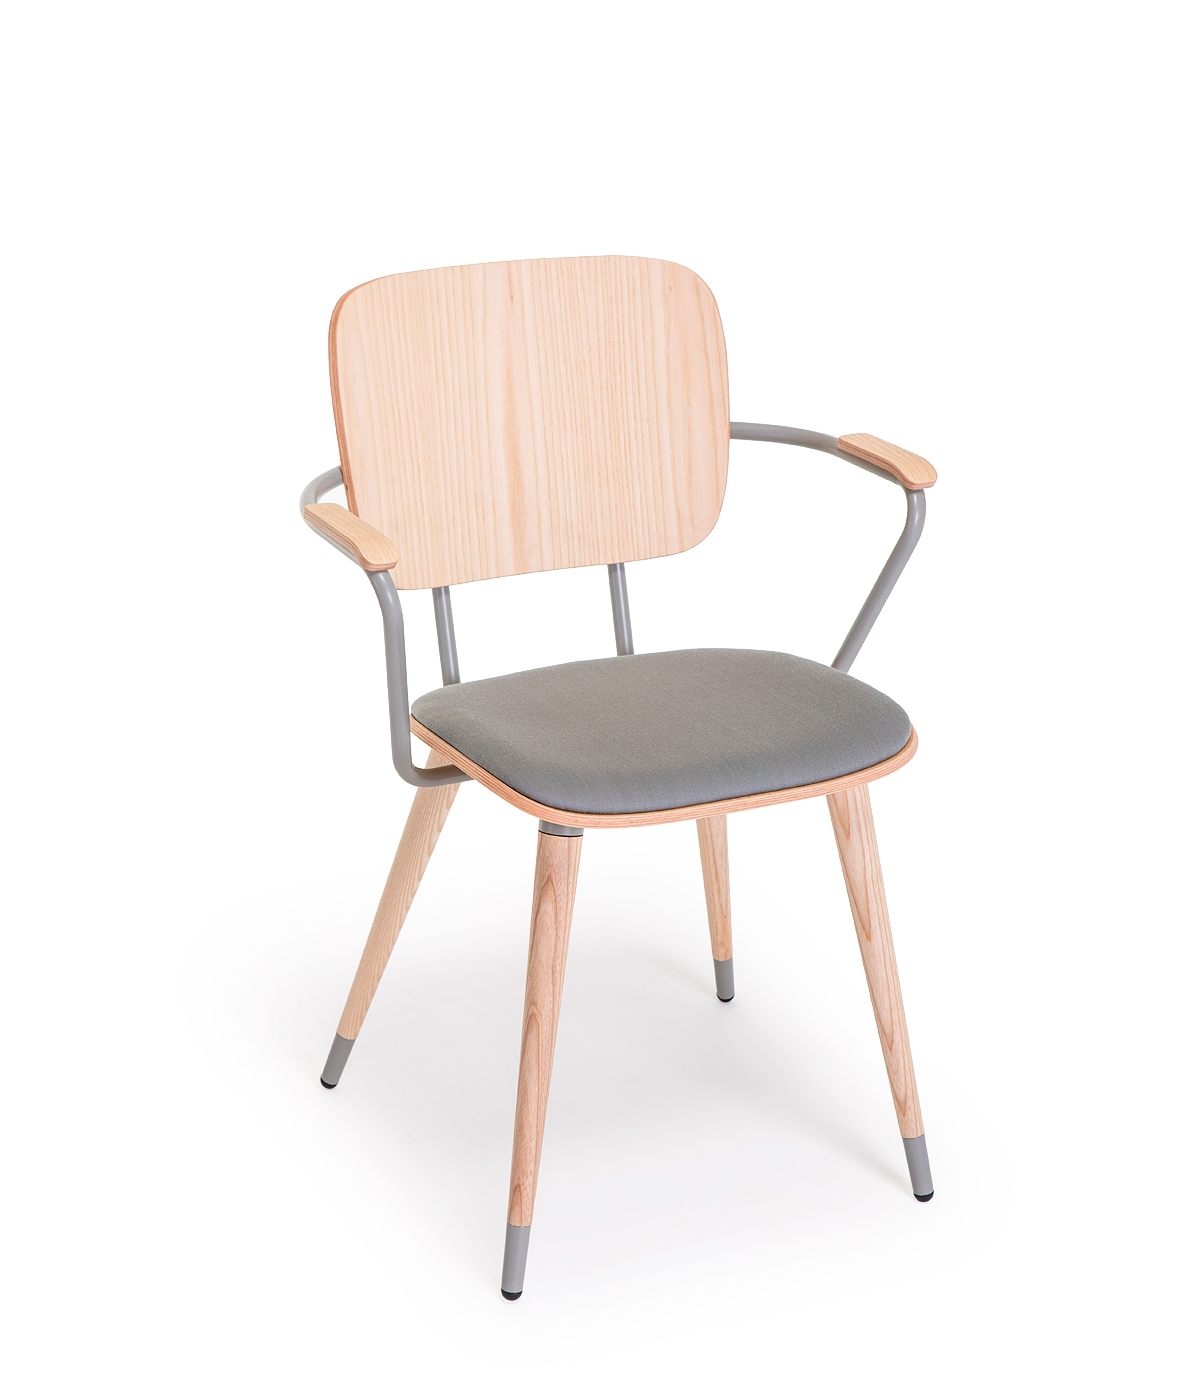 ABC chair with wooden armrests and legs - Vergés